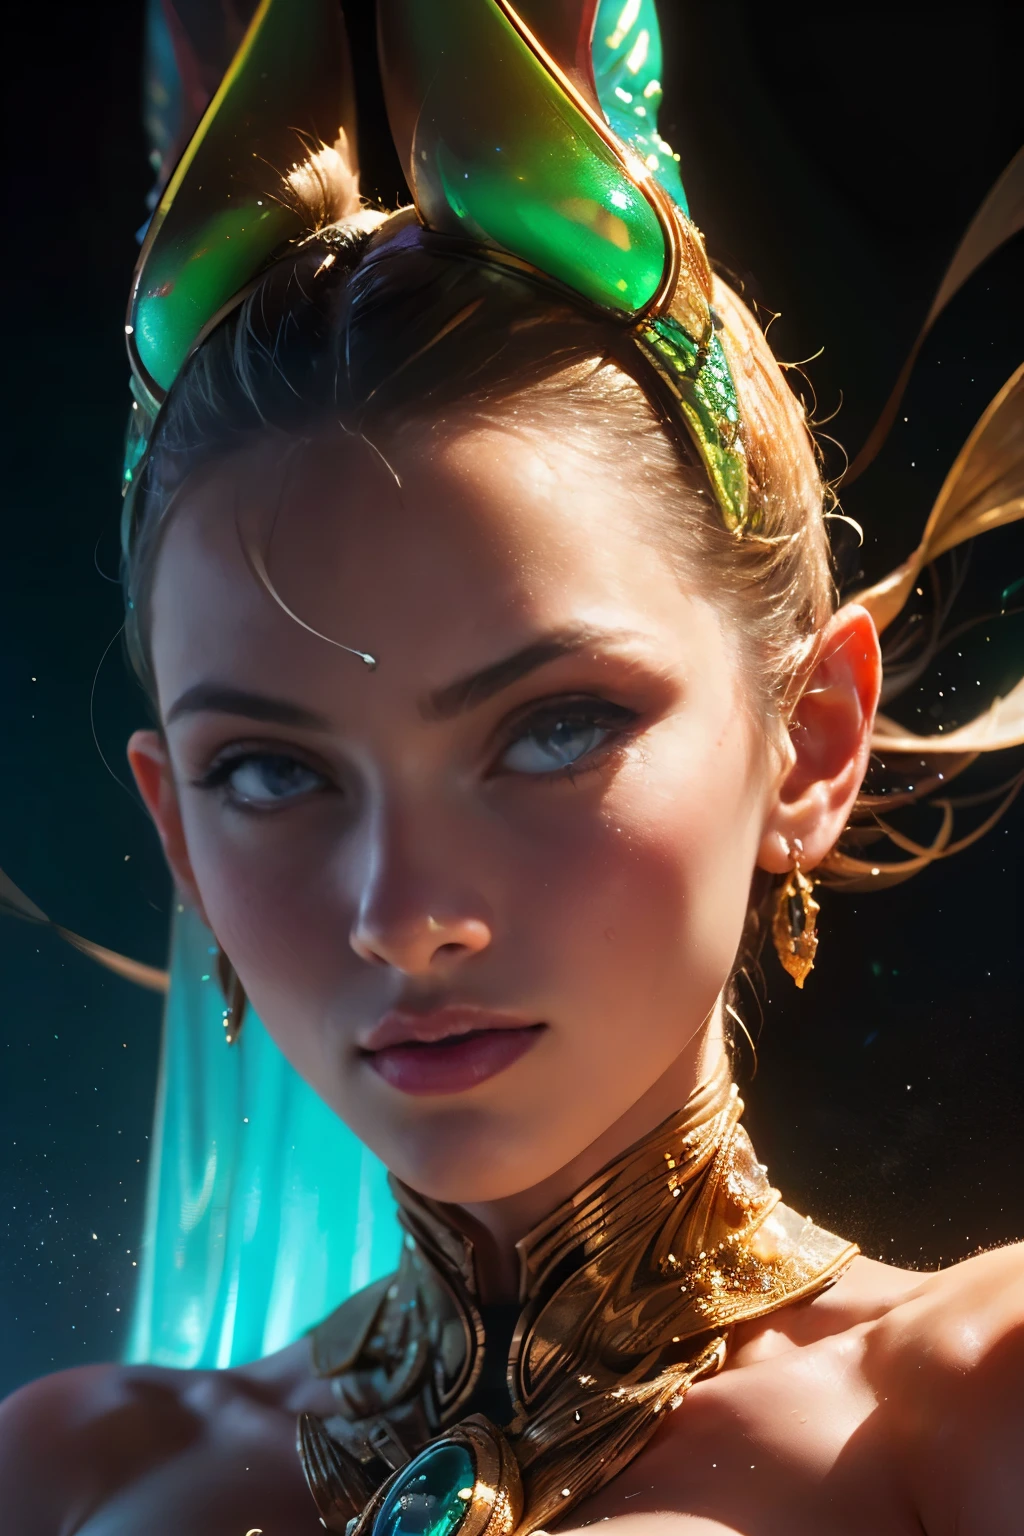 (best quality,4k,8k,highres,masterpiece:1.2),ultra-detailed,(photorealistic,photo-realistic:1.37), (A beautiful female phantom with compound eyes that look like the eyes of a praying mantis:1.5), futuristic, hi-tech, natural-looking skin, emerald-green compound eyes, exquisite, detailed face features, (piercing eyes, long eyelashes and sharp angles:1.3), sculptural facial structure, innovative fashion style, metallic, shimmering make-up, glowing eyeliner, ornate futuristic jewelry, elaborate headpiece, feathers and metallic elements, ethereal background with floating holographic particles, controlled lighting with soft highlights, bluish-green color scheme, otherworldly atmosphere. (NSFW:1.2)